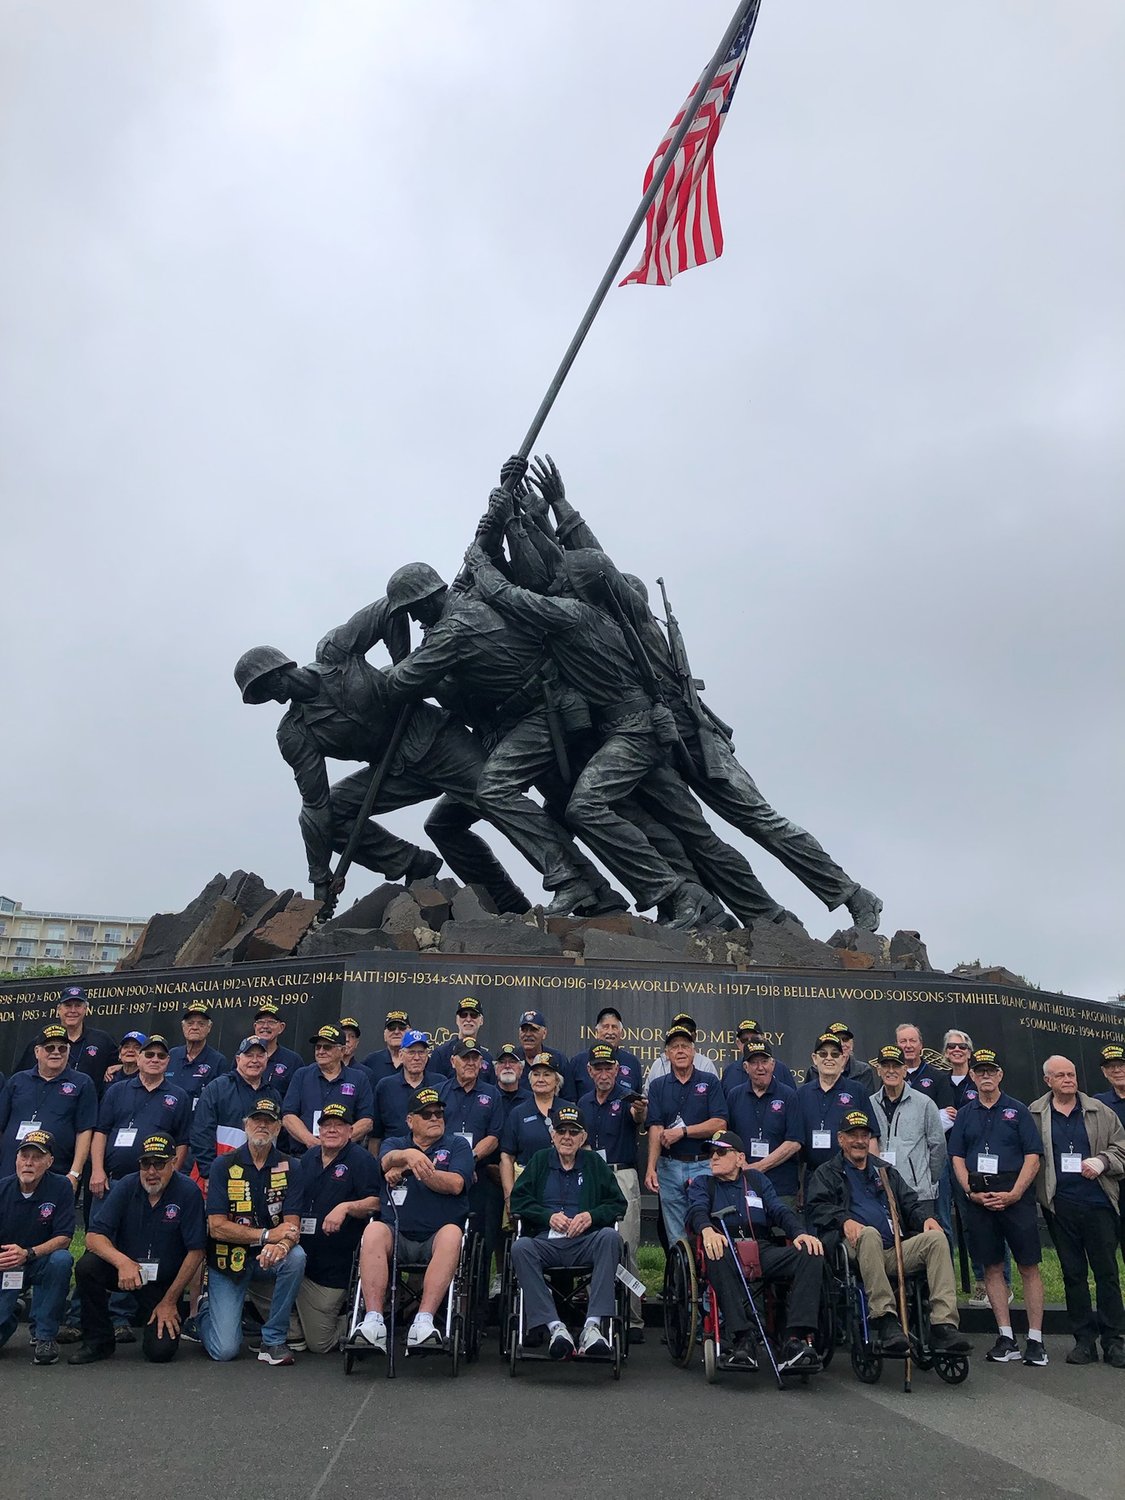 Veterans (WWII, Korean and Vietnam) across at the Texas at Iwo Jima Memorial or known as the Marine Corps War Memorial in May. The Honor Flight Austin flew veterans prior of 1975 to Washington D.C. to visit their respective memorials.